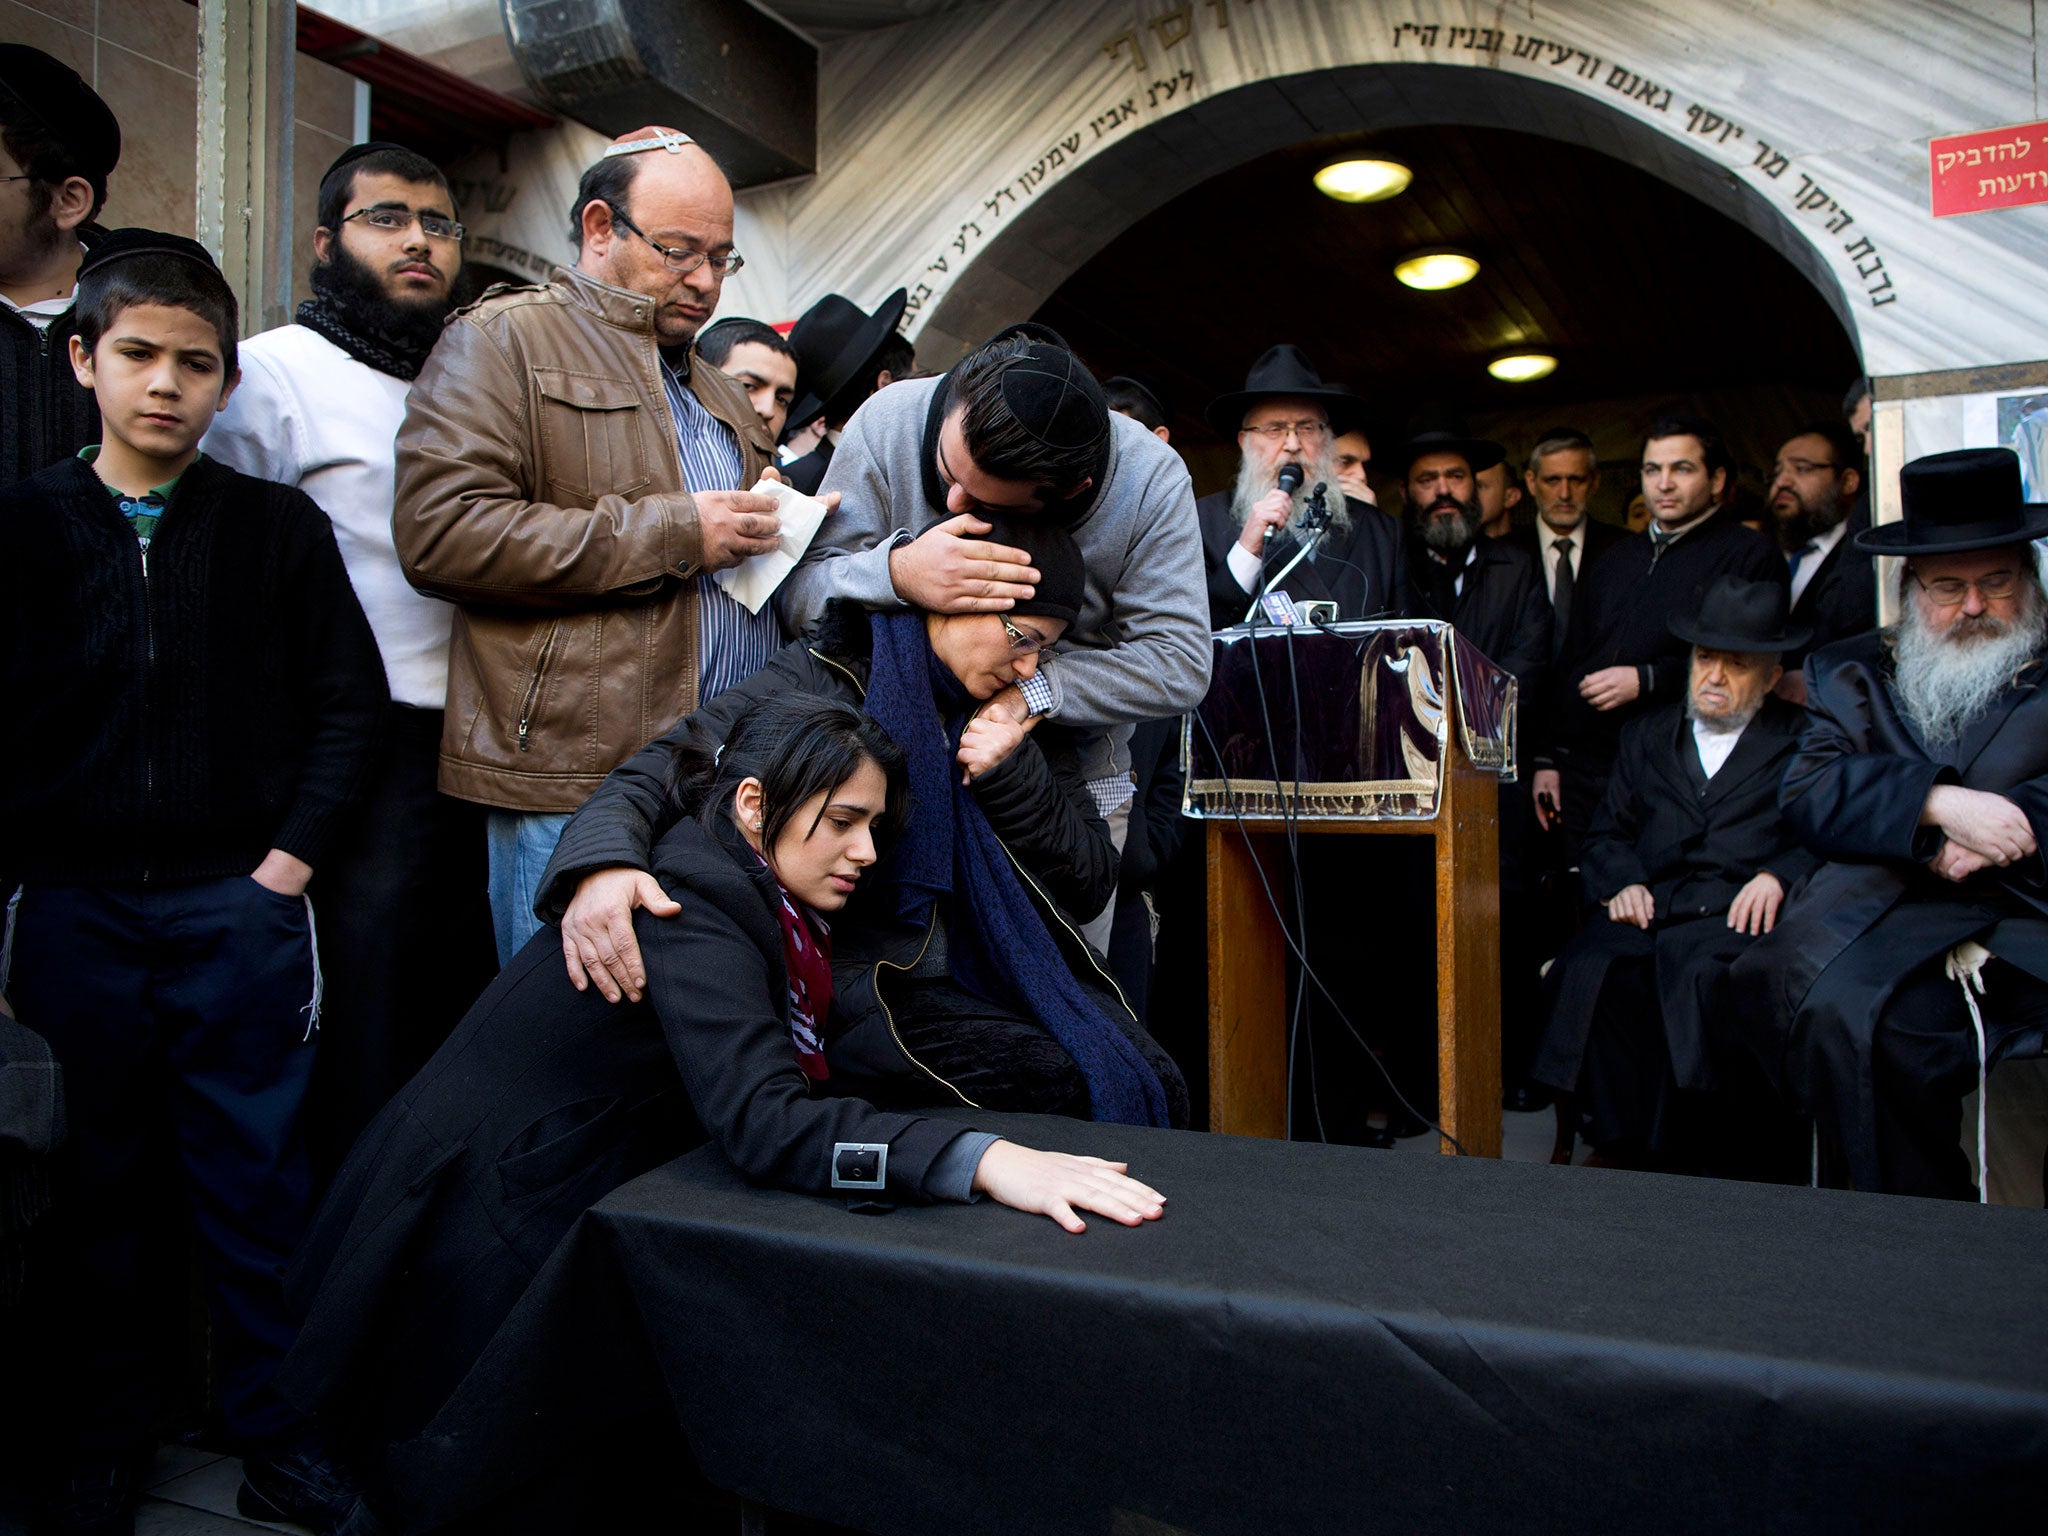 Family and relatives of French Jew Yoav Hattab, a victim of the attack on a kosher grocery store in Paris, gather around a symbolic coffin for his funeral procession in the city of Bnei Brak near Tel Aviv, Israel